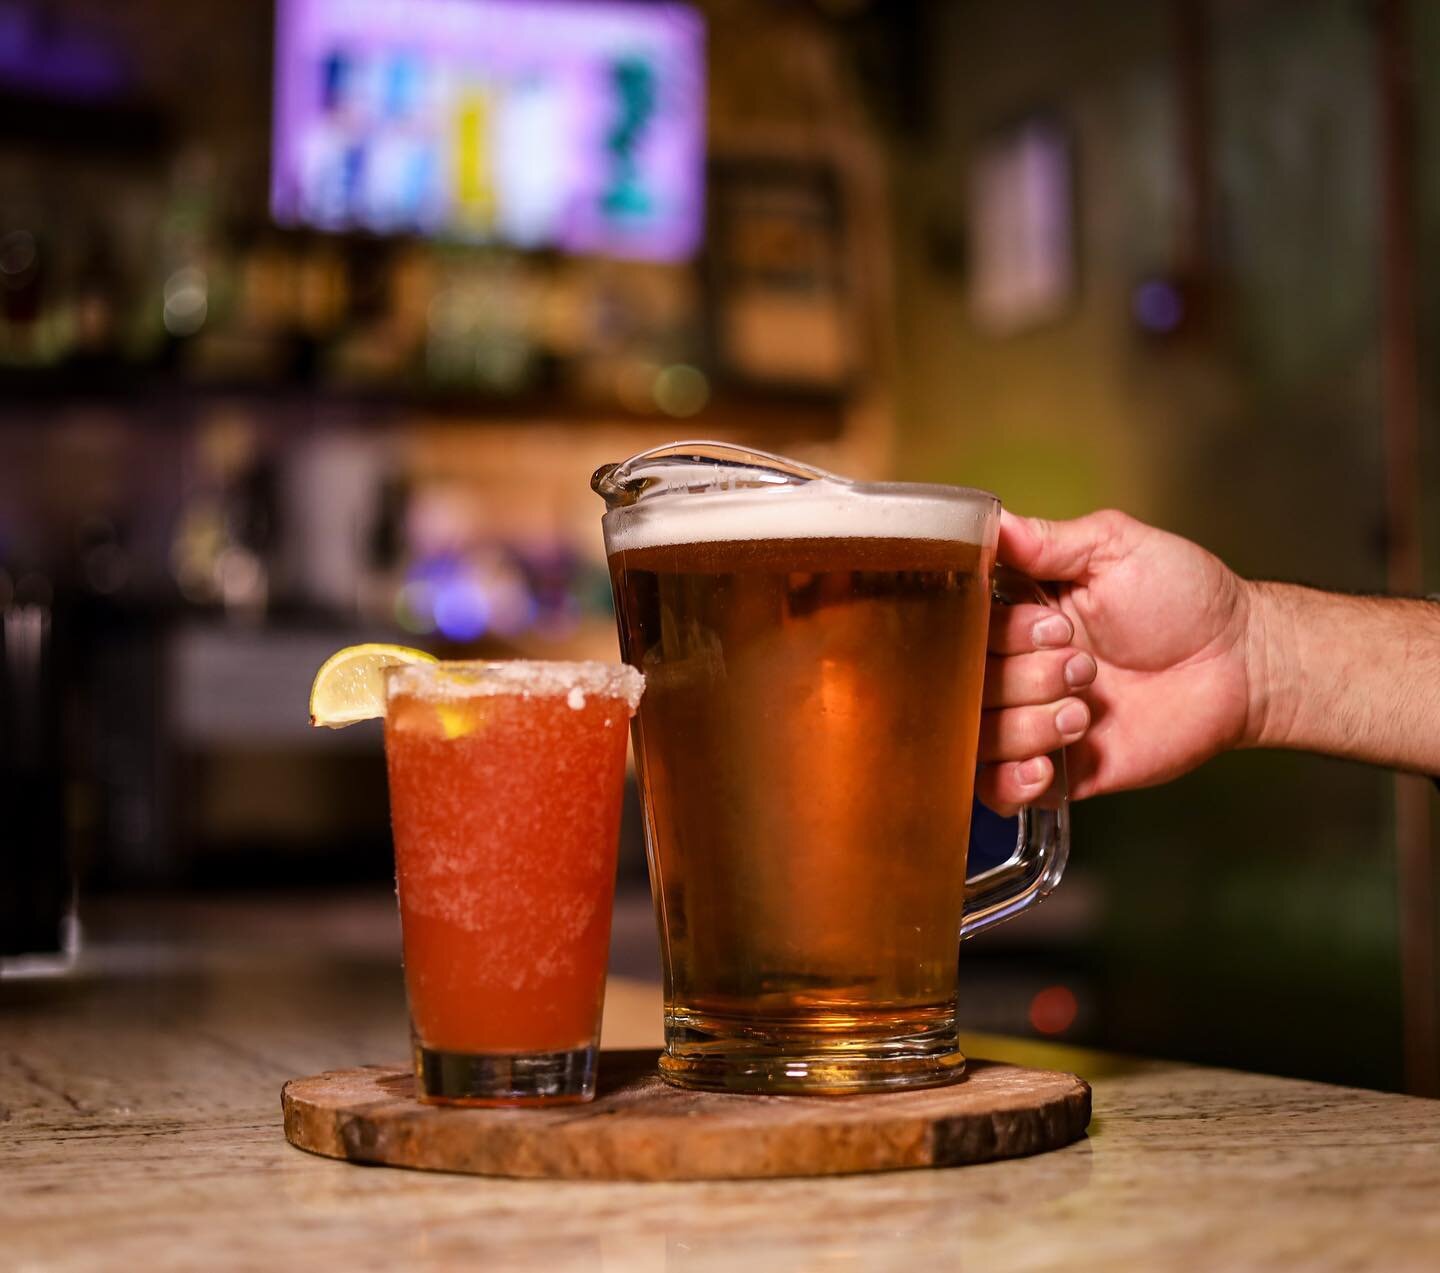 Tuesdays are for micheladas in the heart of Wynwood with your mates🍺🔝

$5 Beer Bucket 
$10 Beer Pitcher 

Book your table now 🗓  Visit our website or call us (305) 505-8449

🍸www.baccanomiami.com (link in bio) 
📍169 NW 23rd St, Miami, FL.

#wynw